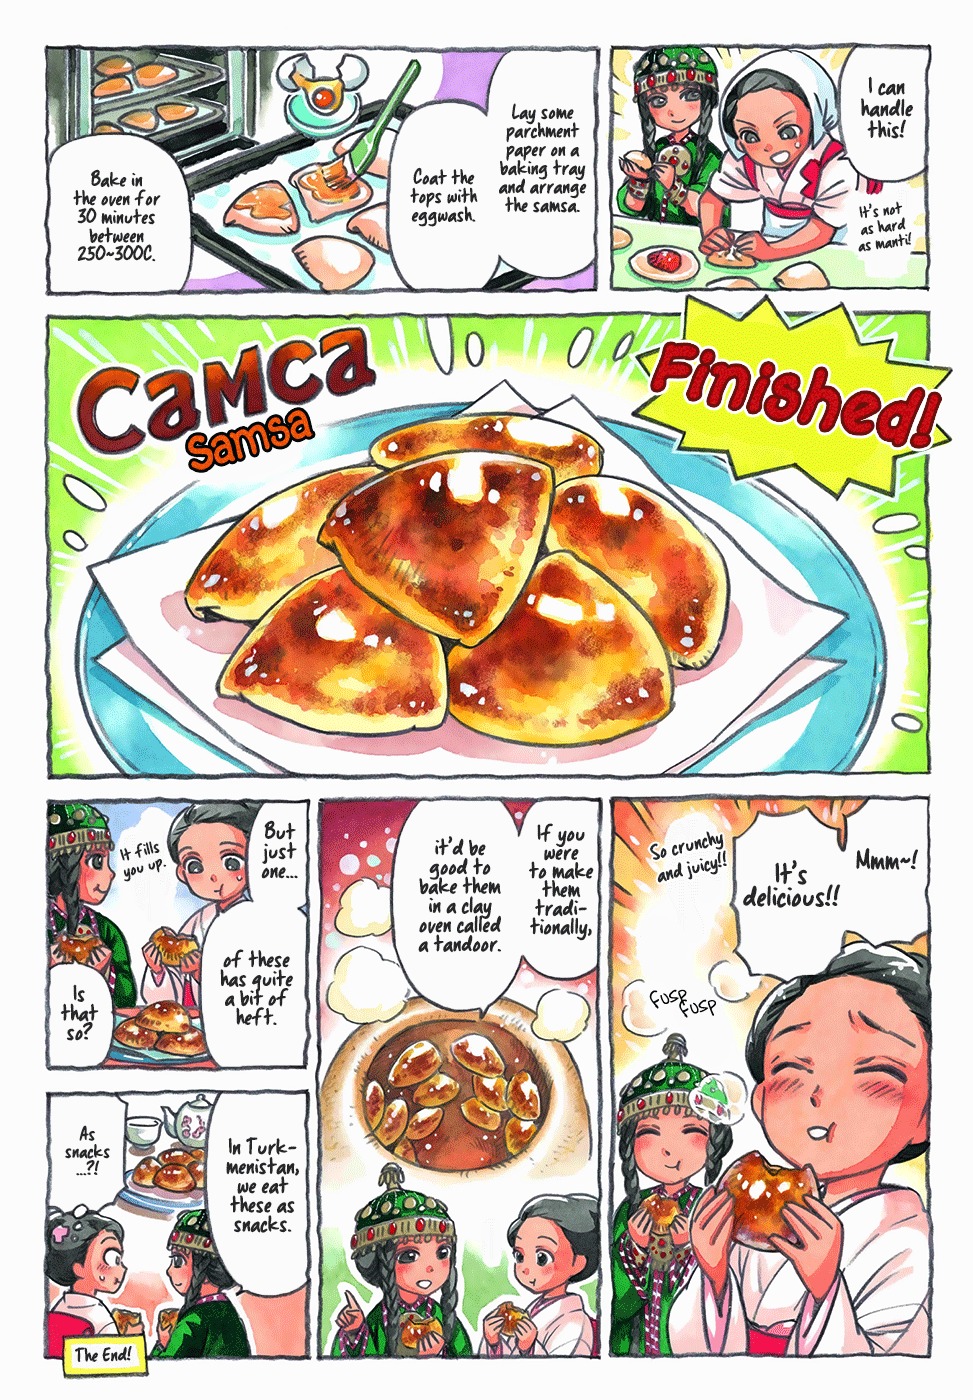 Chuuou Asia Cooking ch.5